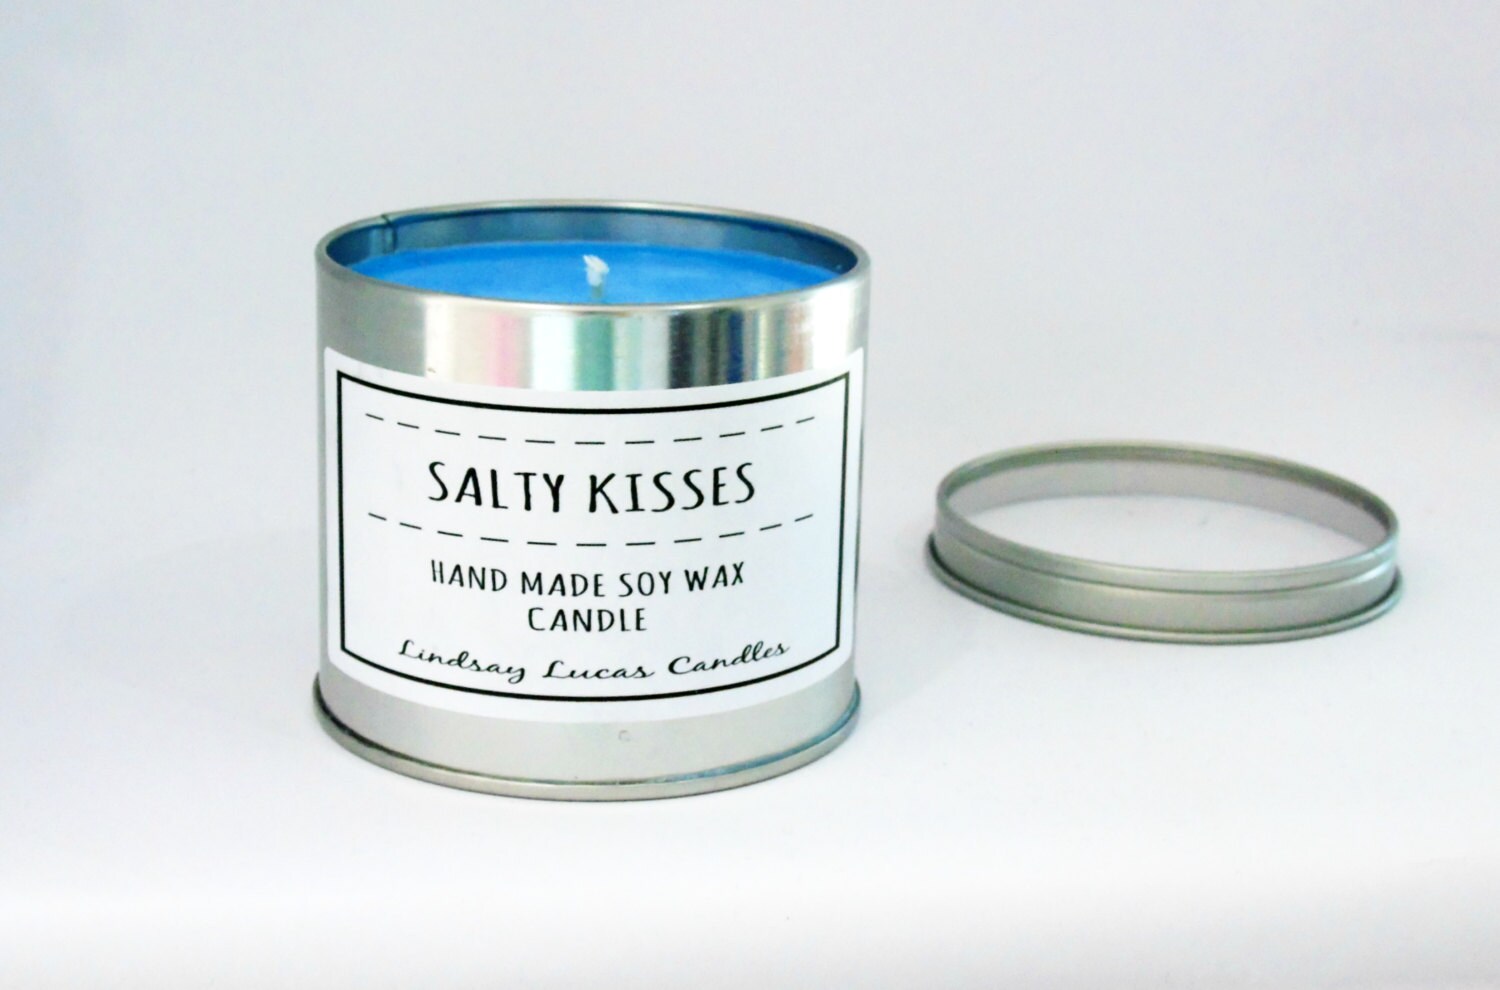 Sea Spray Candle Fresh Scented Candle Tin Candle Scented